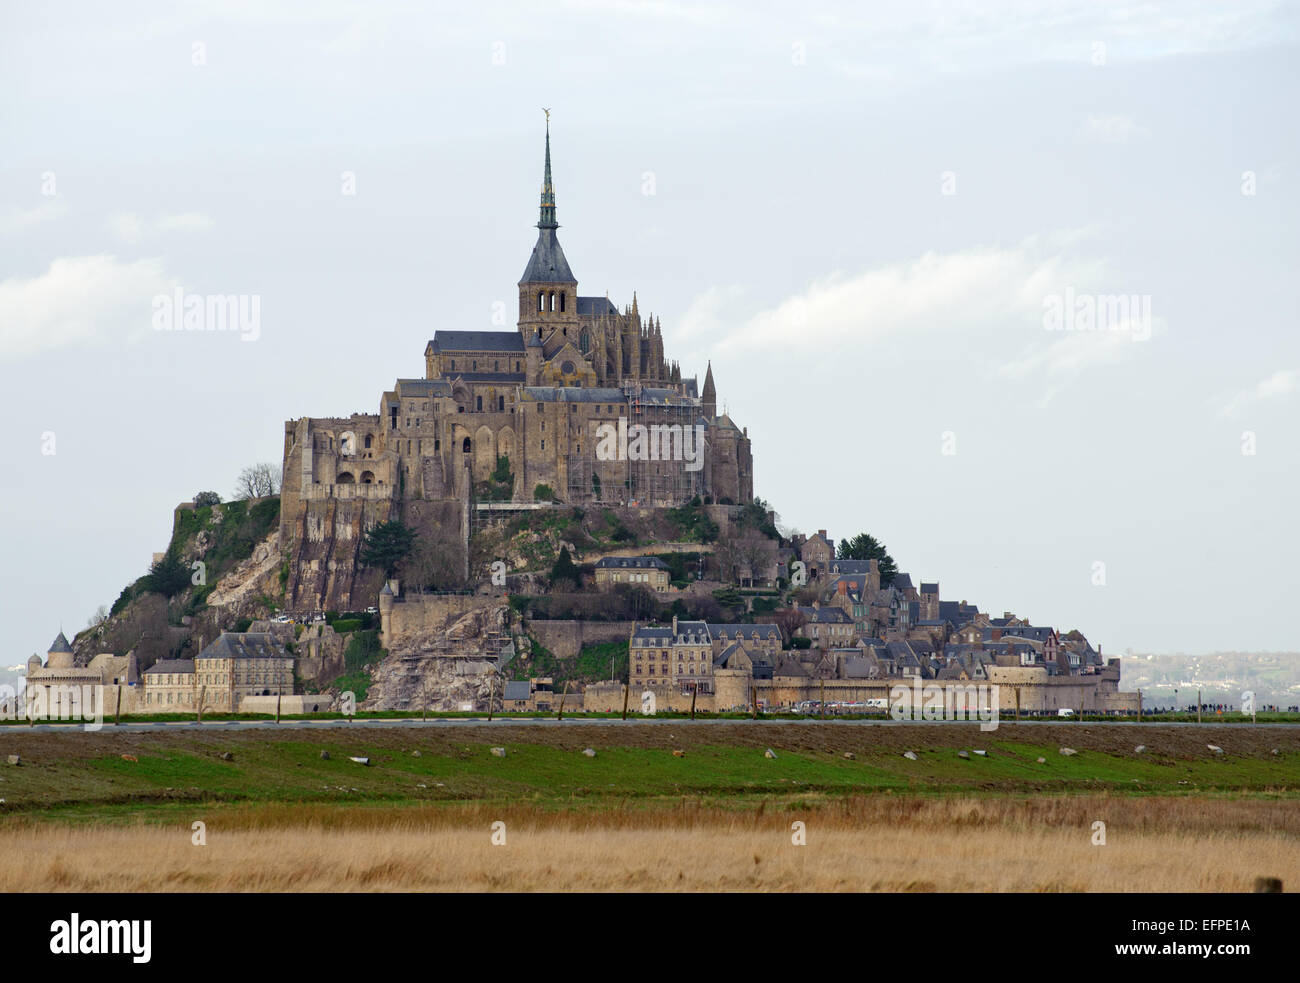 View on the Le Mont Saint Michel monastery, Normandy, France.Photo taken on: January 02nd, 2014 Stock Photo